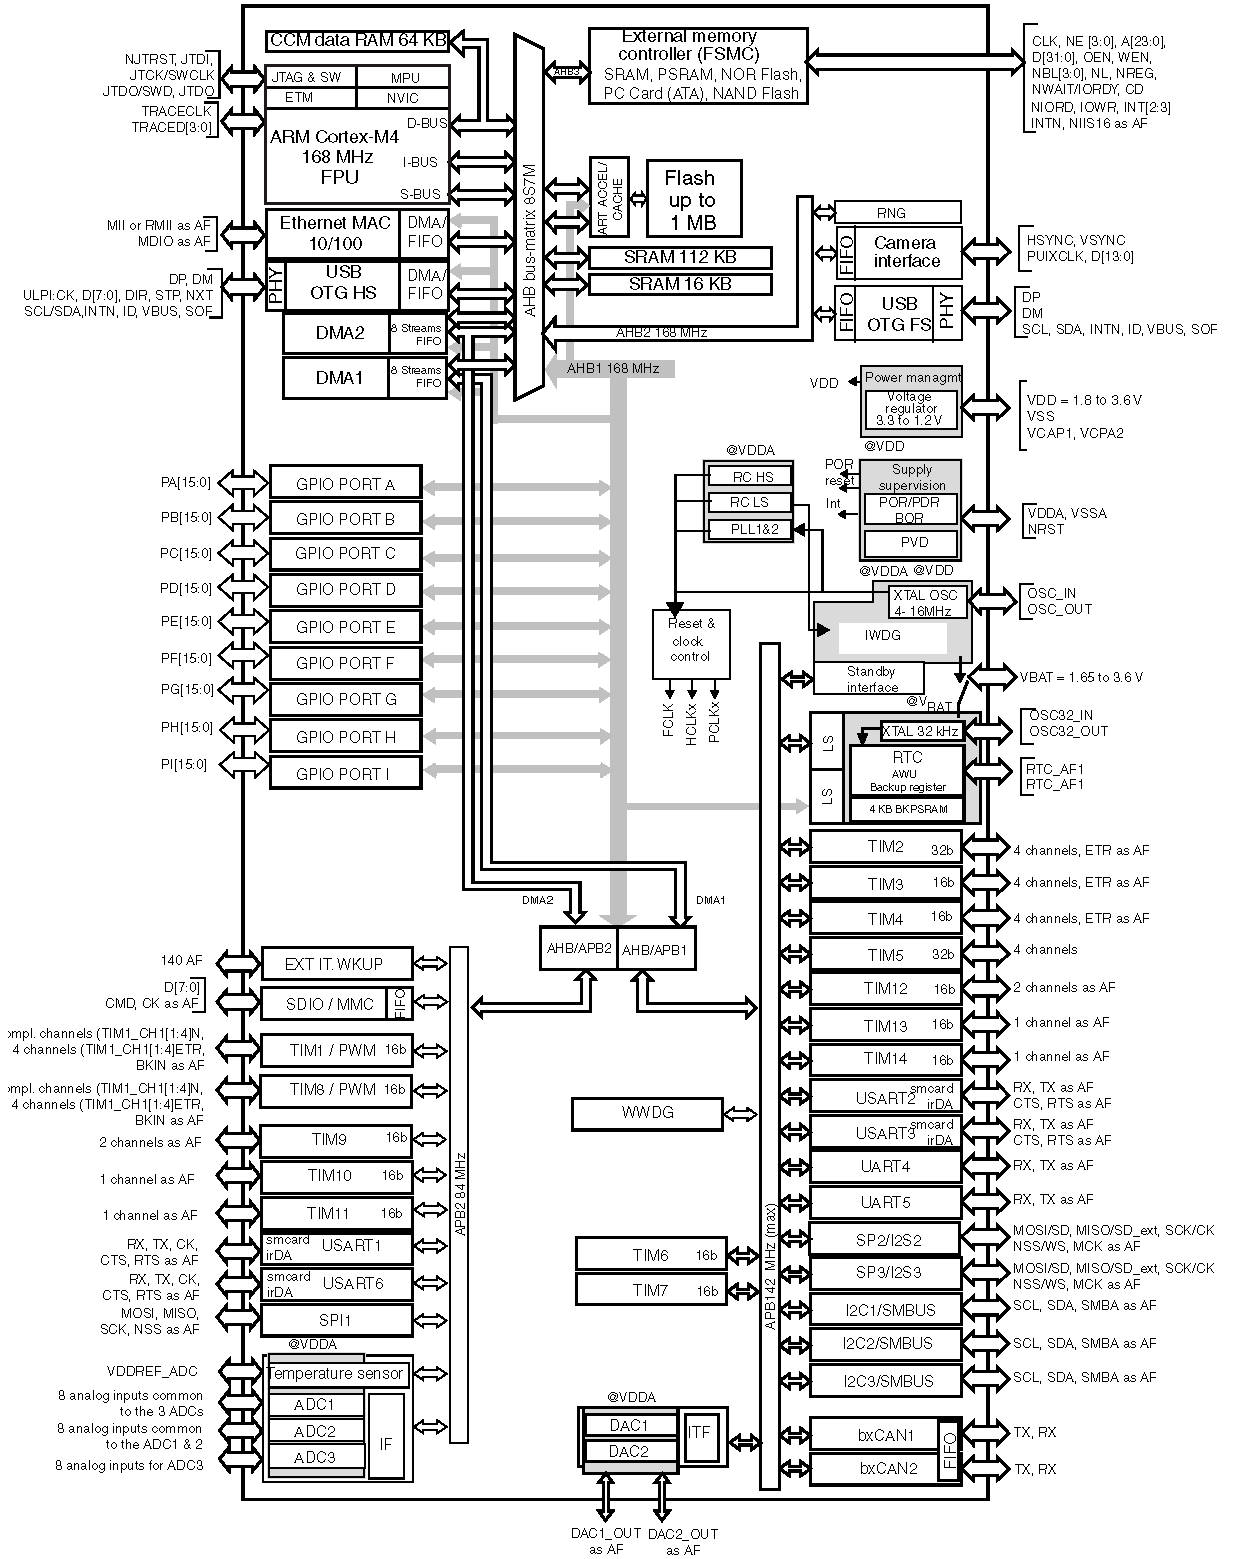 Block diagram of STM32F7xx discovery